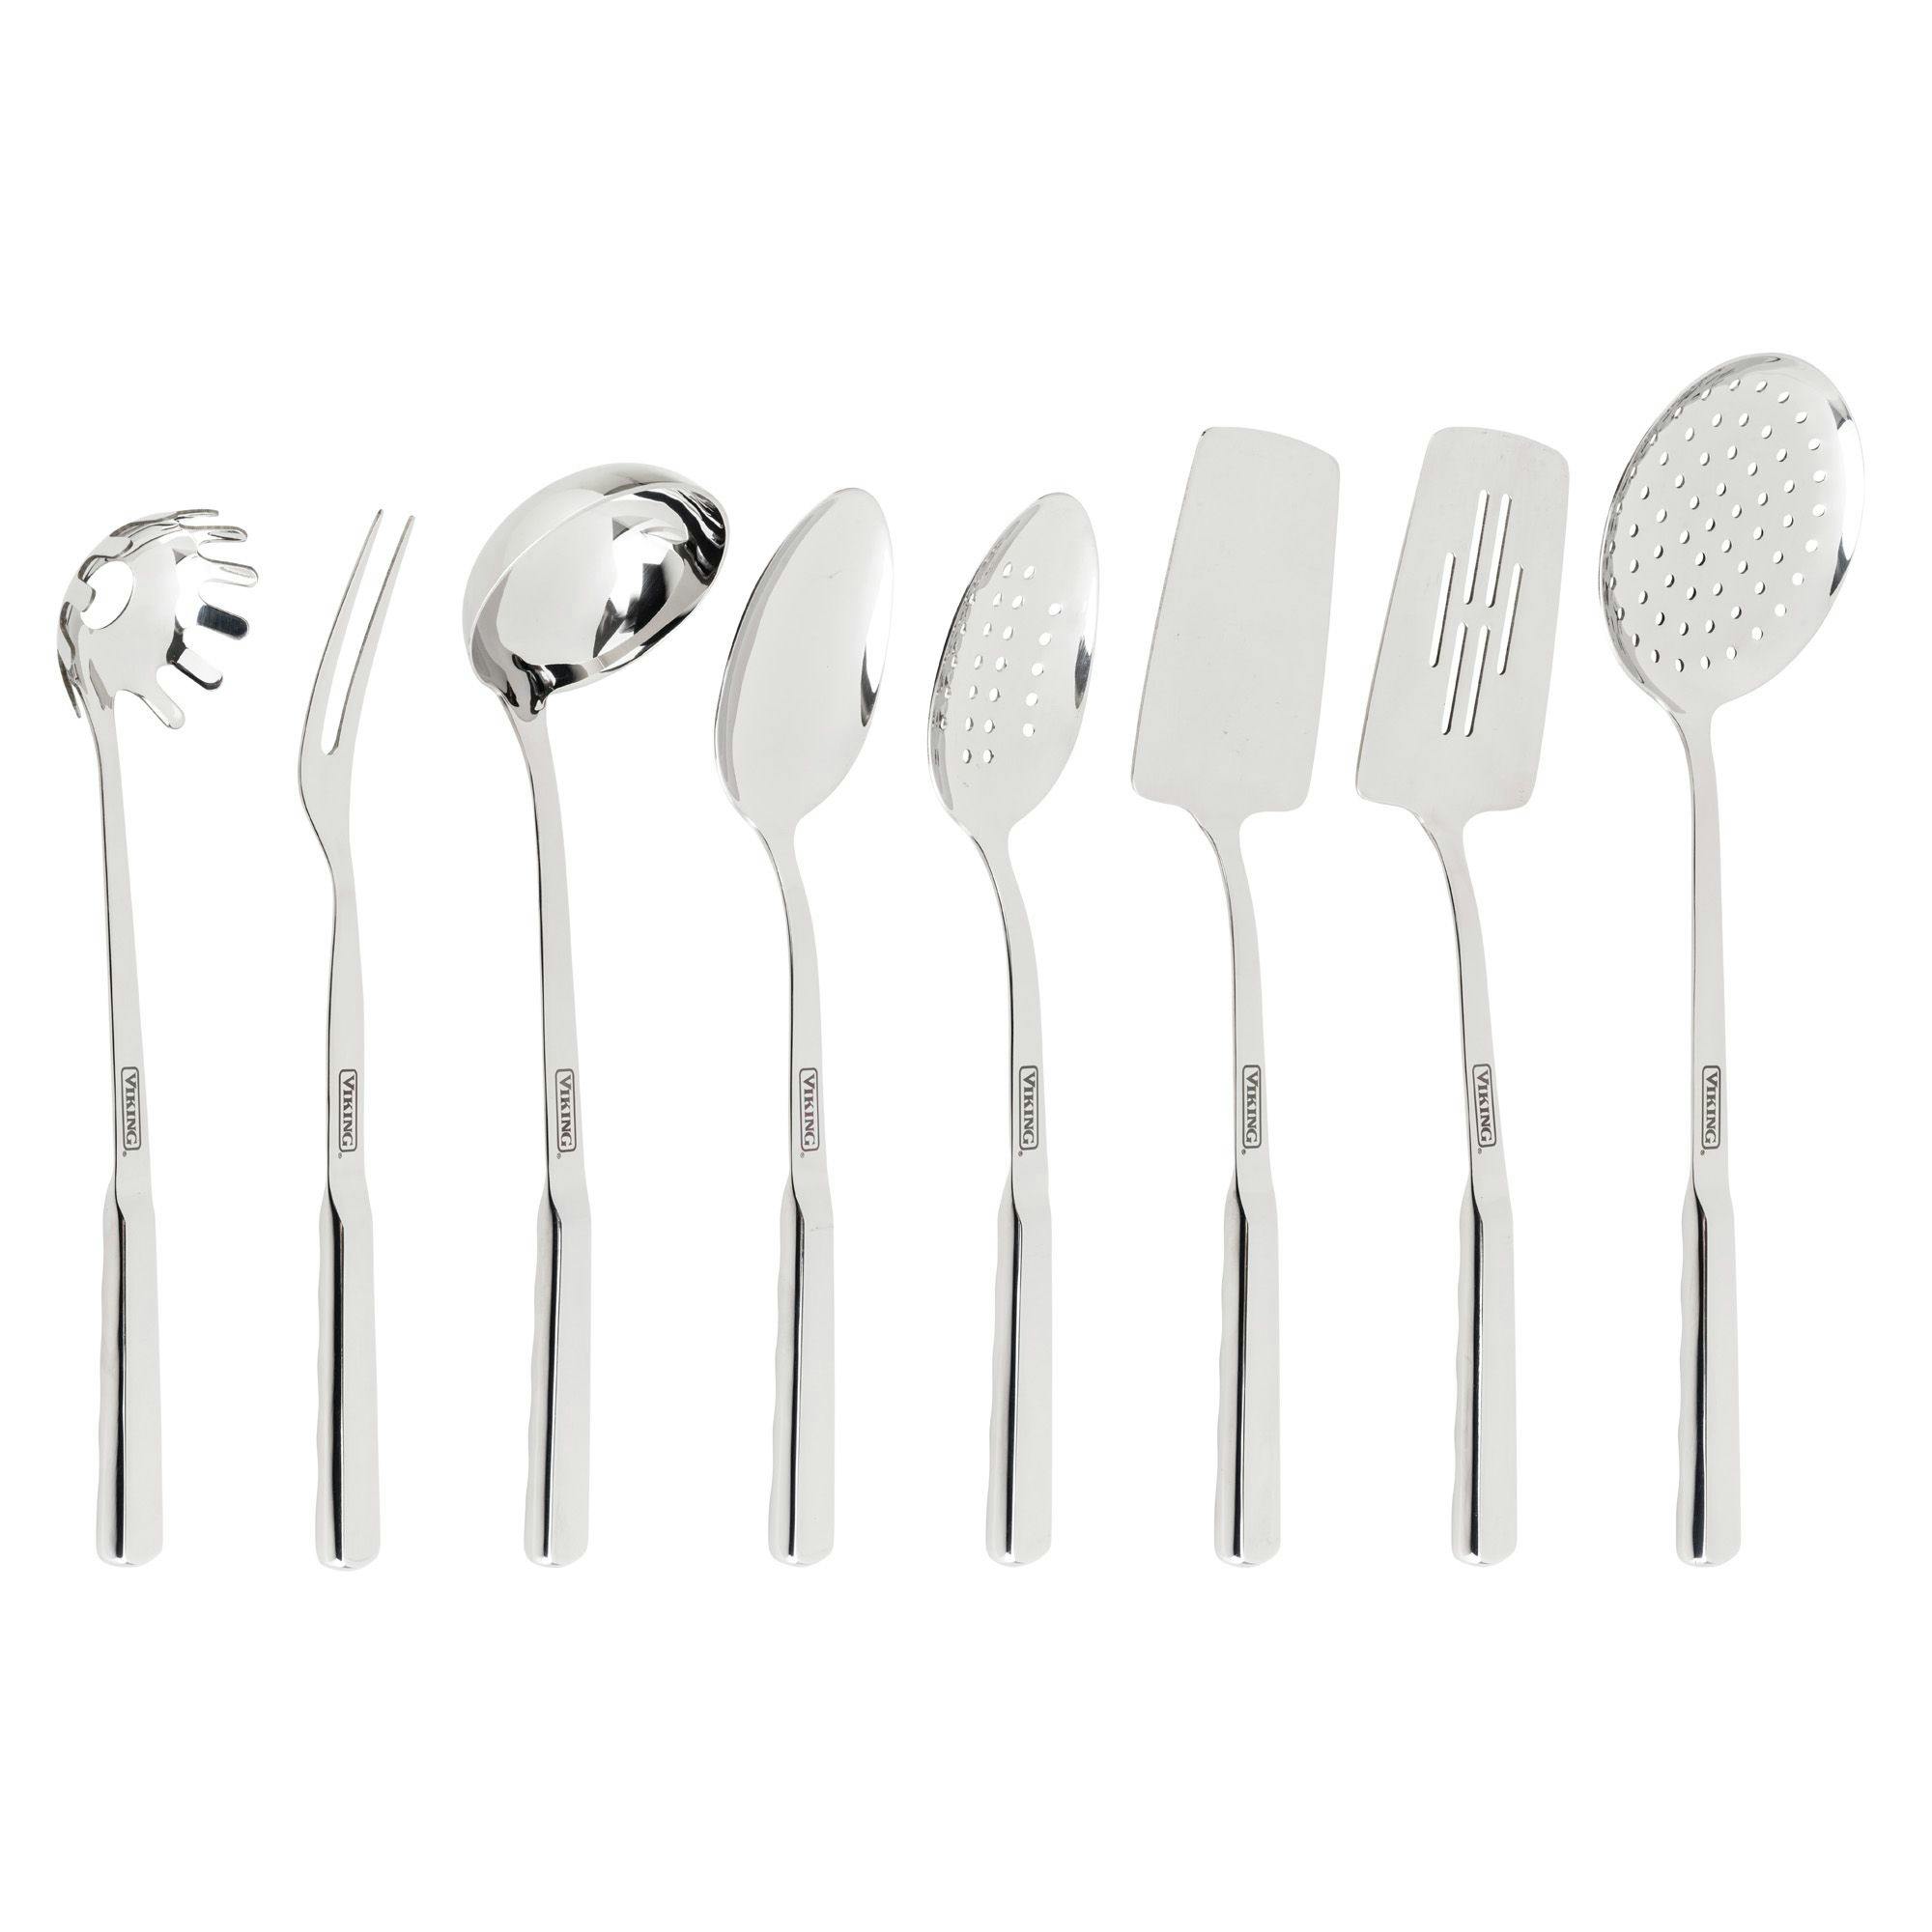 Viking 8pc  Stainless Steel Utensil Set
(Solid & Slotted Spatula, Slotted & Solid Spoon, Pasta Fork, Ladle, Meat Fork, Skimmer)